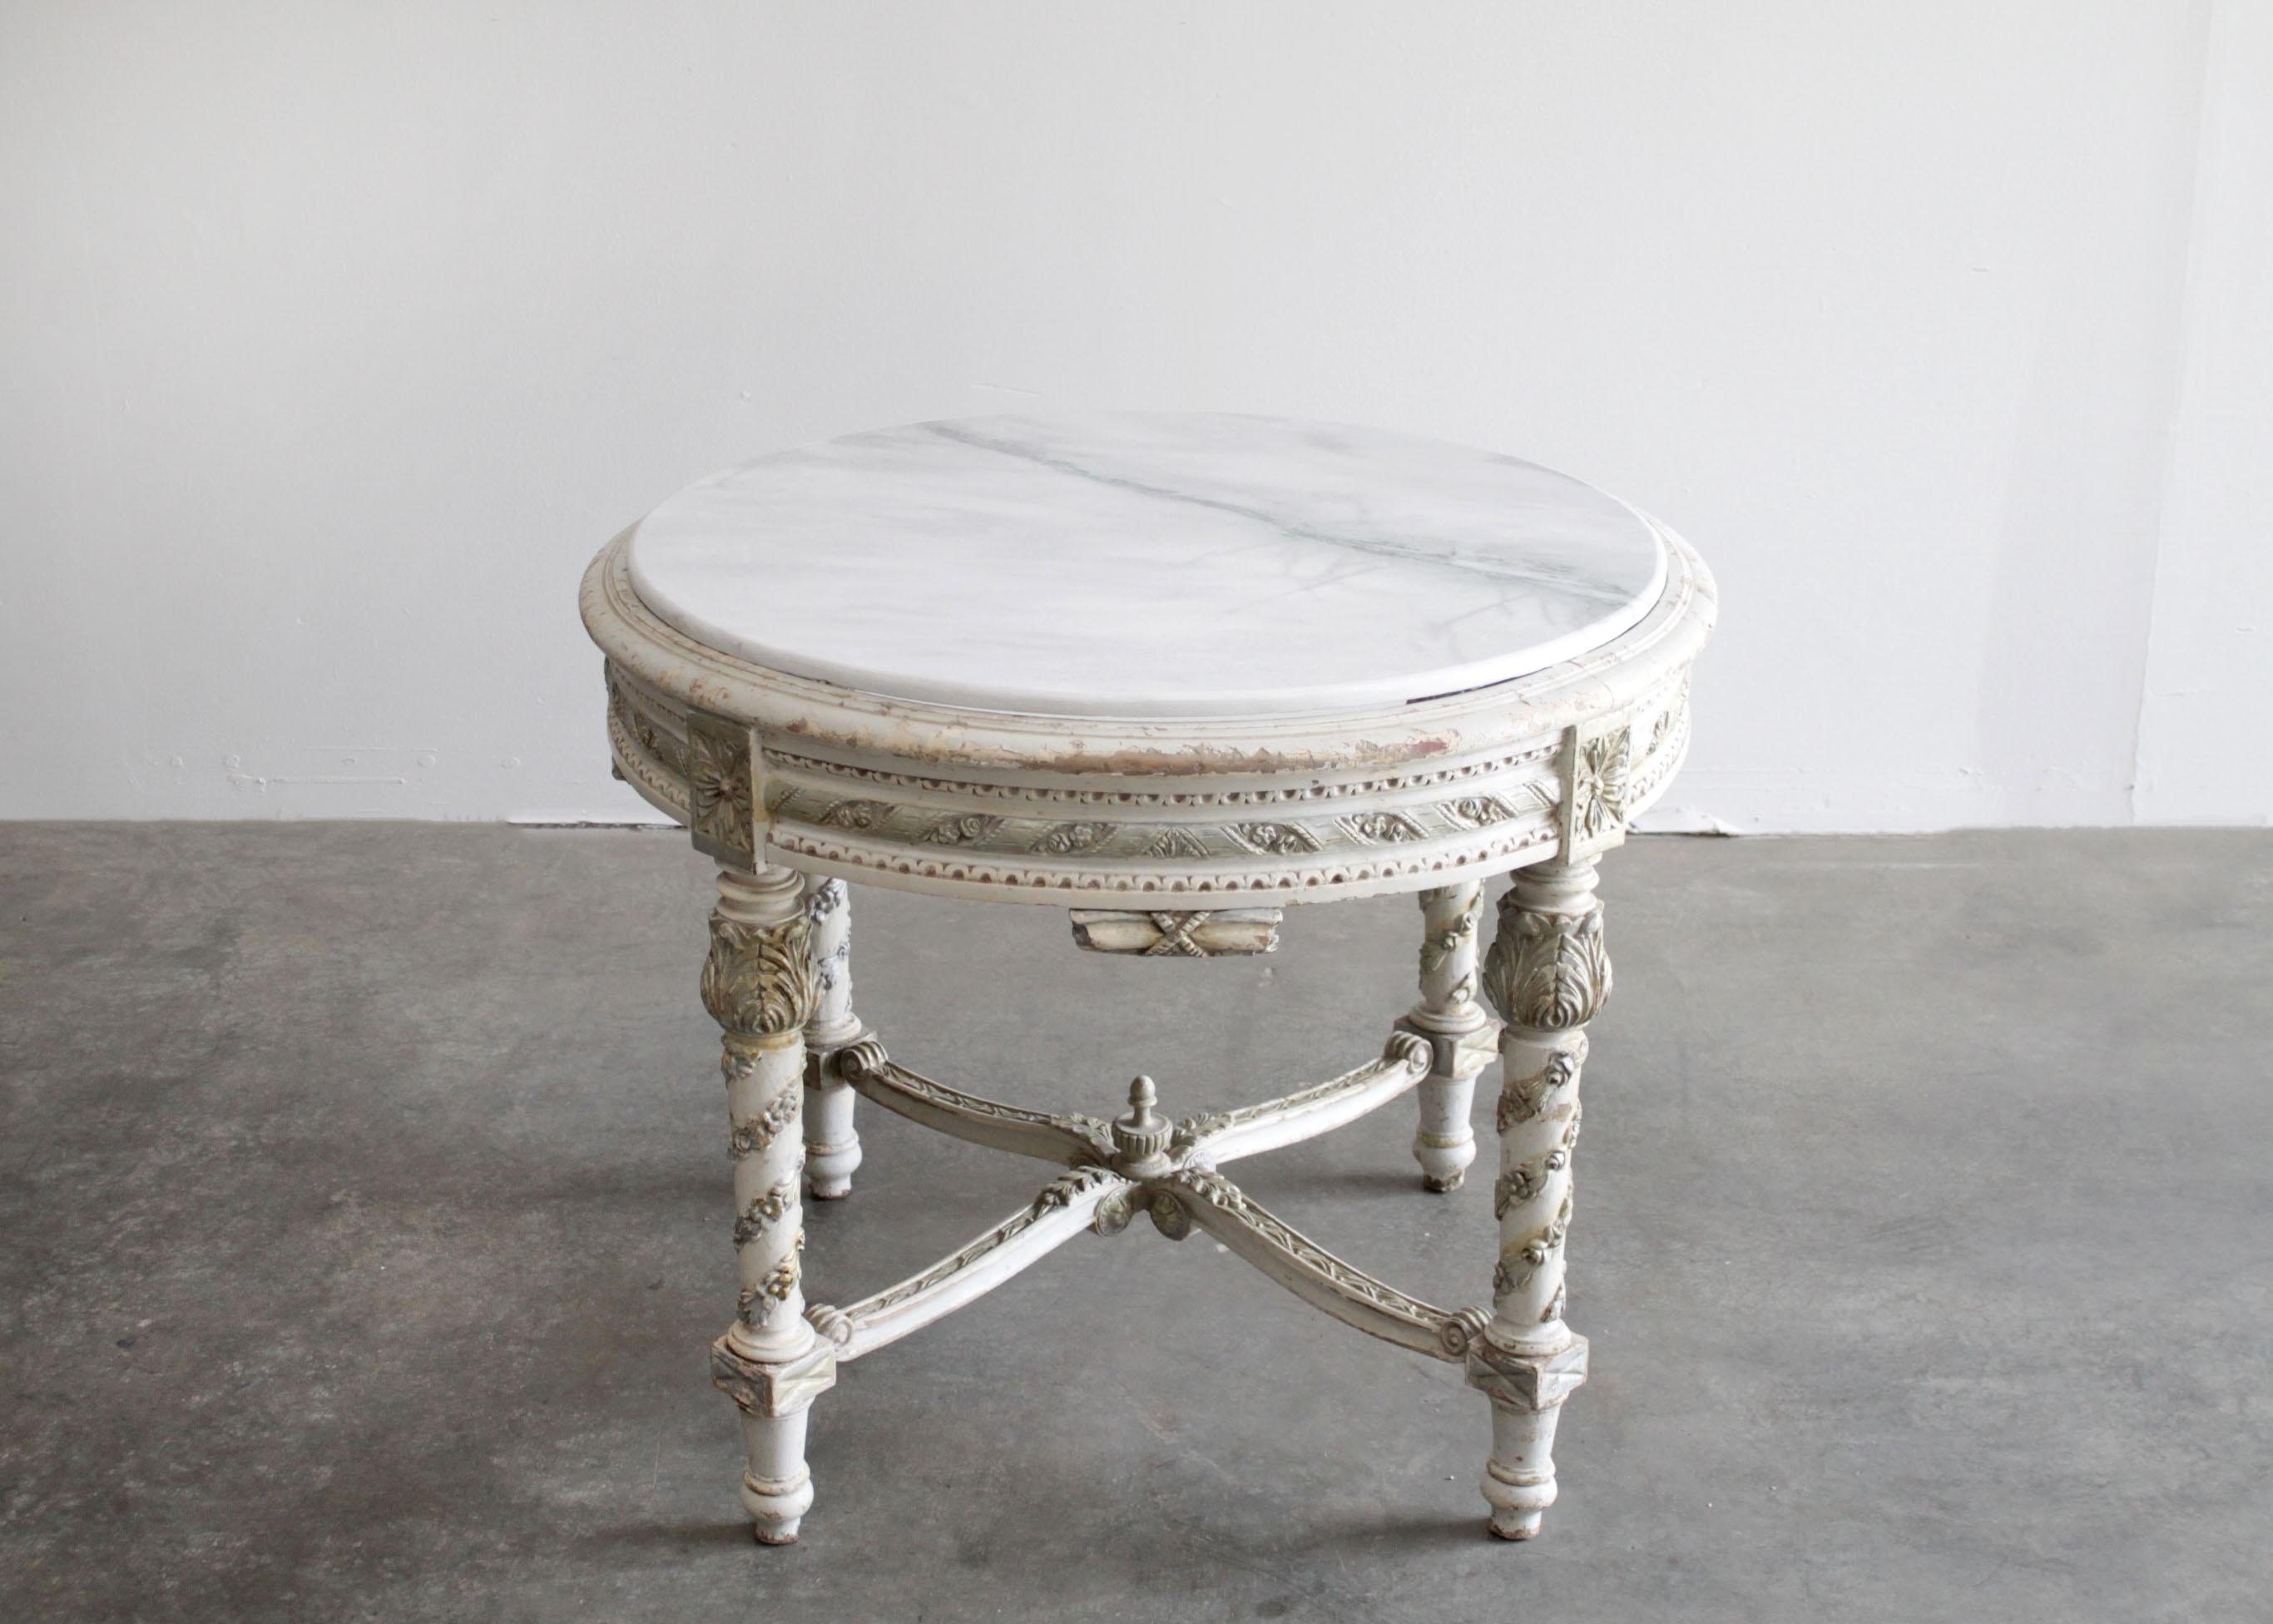 Antique painted French style center table in the Louis XVI style with marble top
This round center table features carved rose garlands around the legs, with a beautiful
carved stretcher and finial.
The marble is a new addition to this table, in a